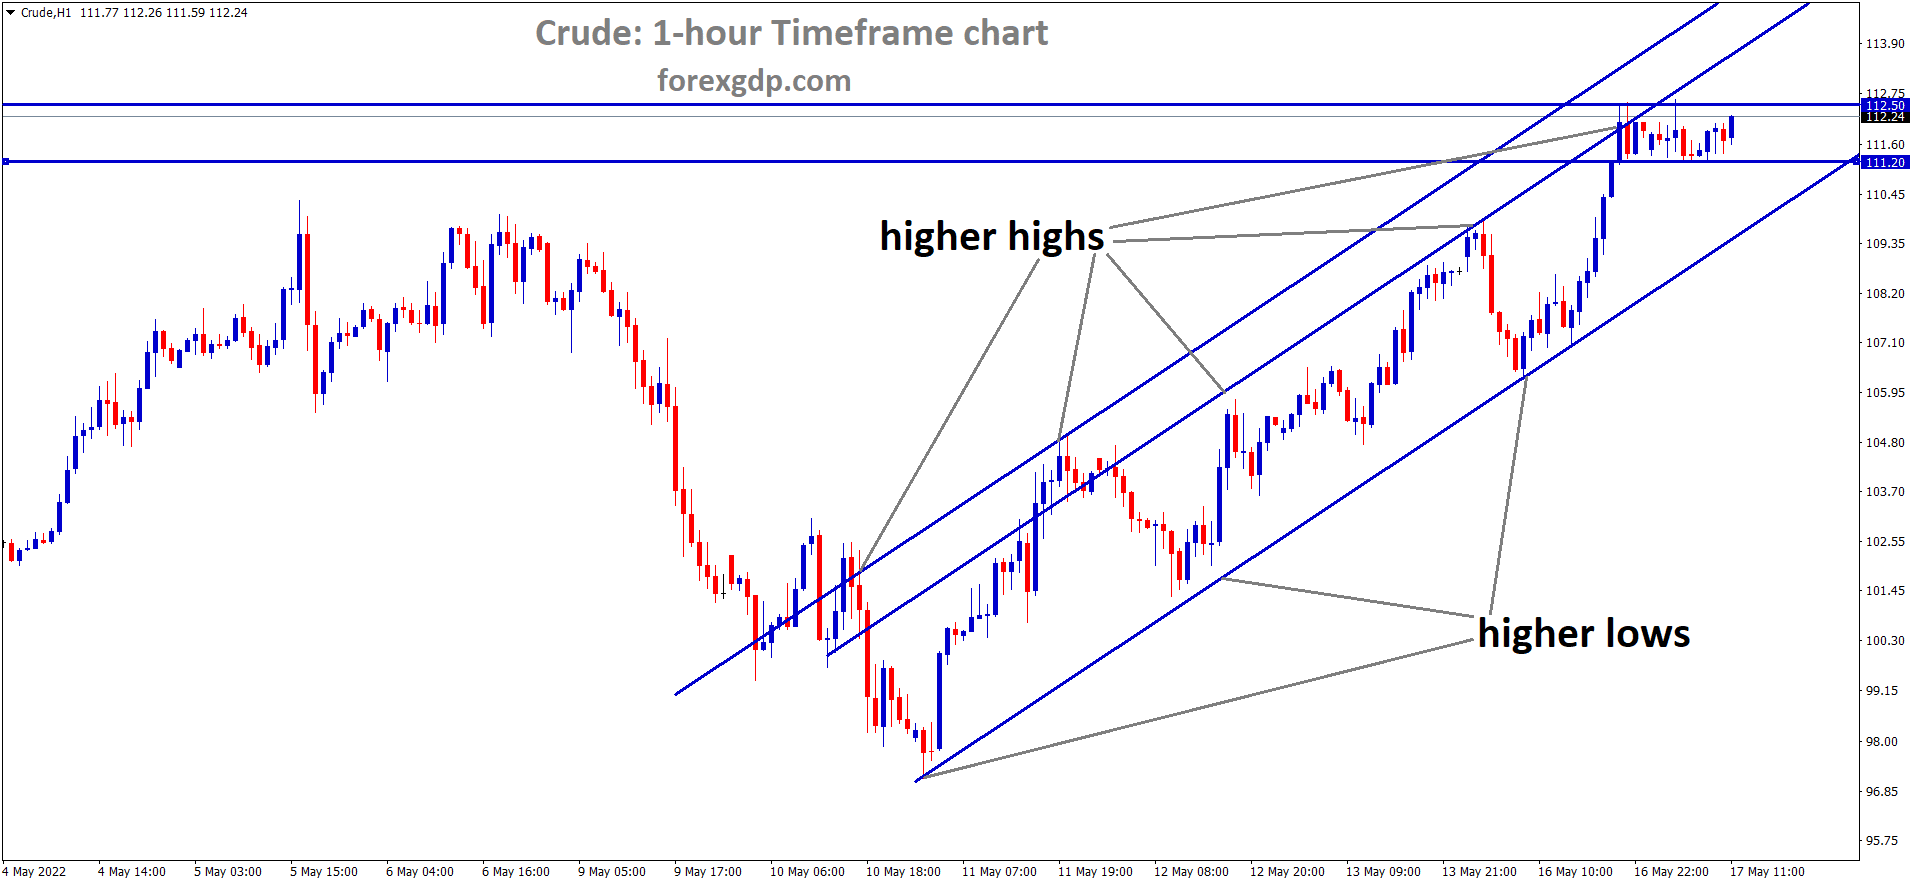 Crude Oil H1 Time Frame Analysis Market is moving in an Ascending channel and the Market has consolidated at the higher high area of the Ascending channel